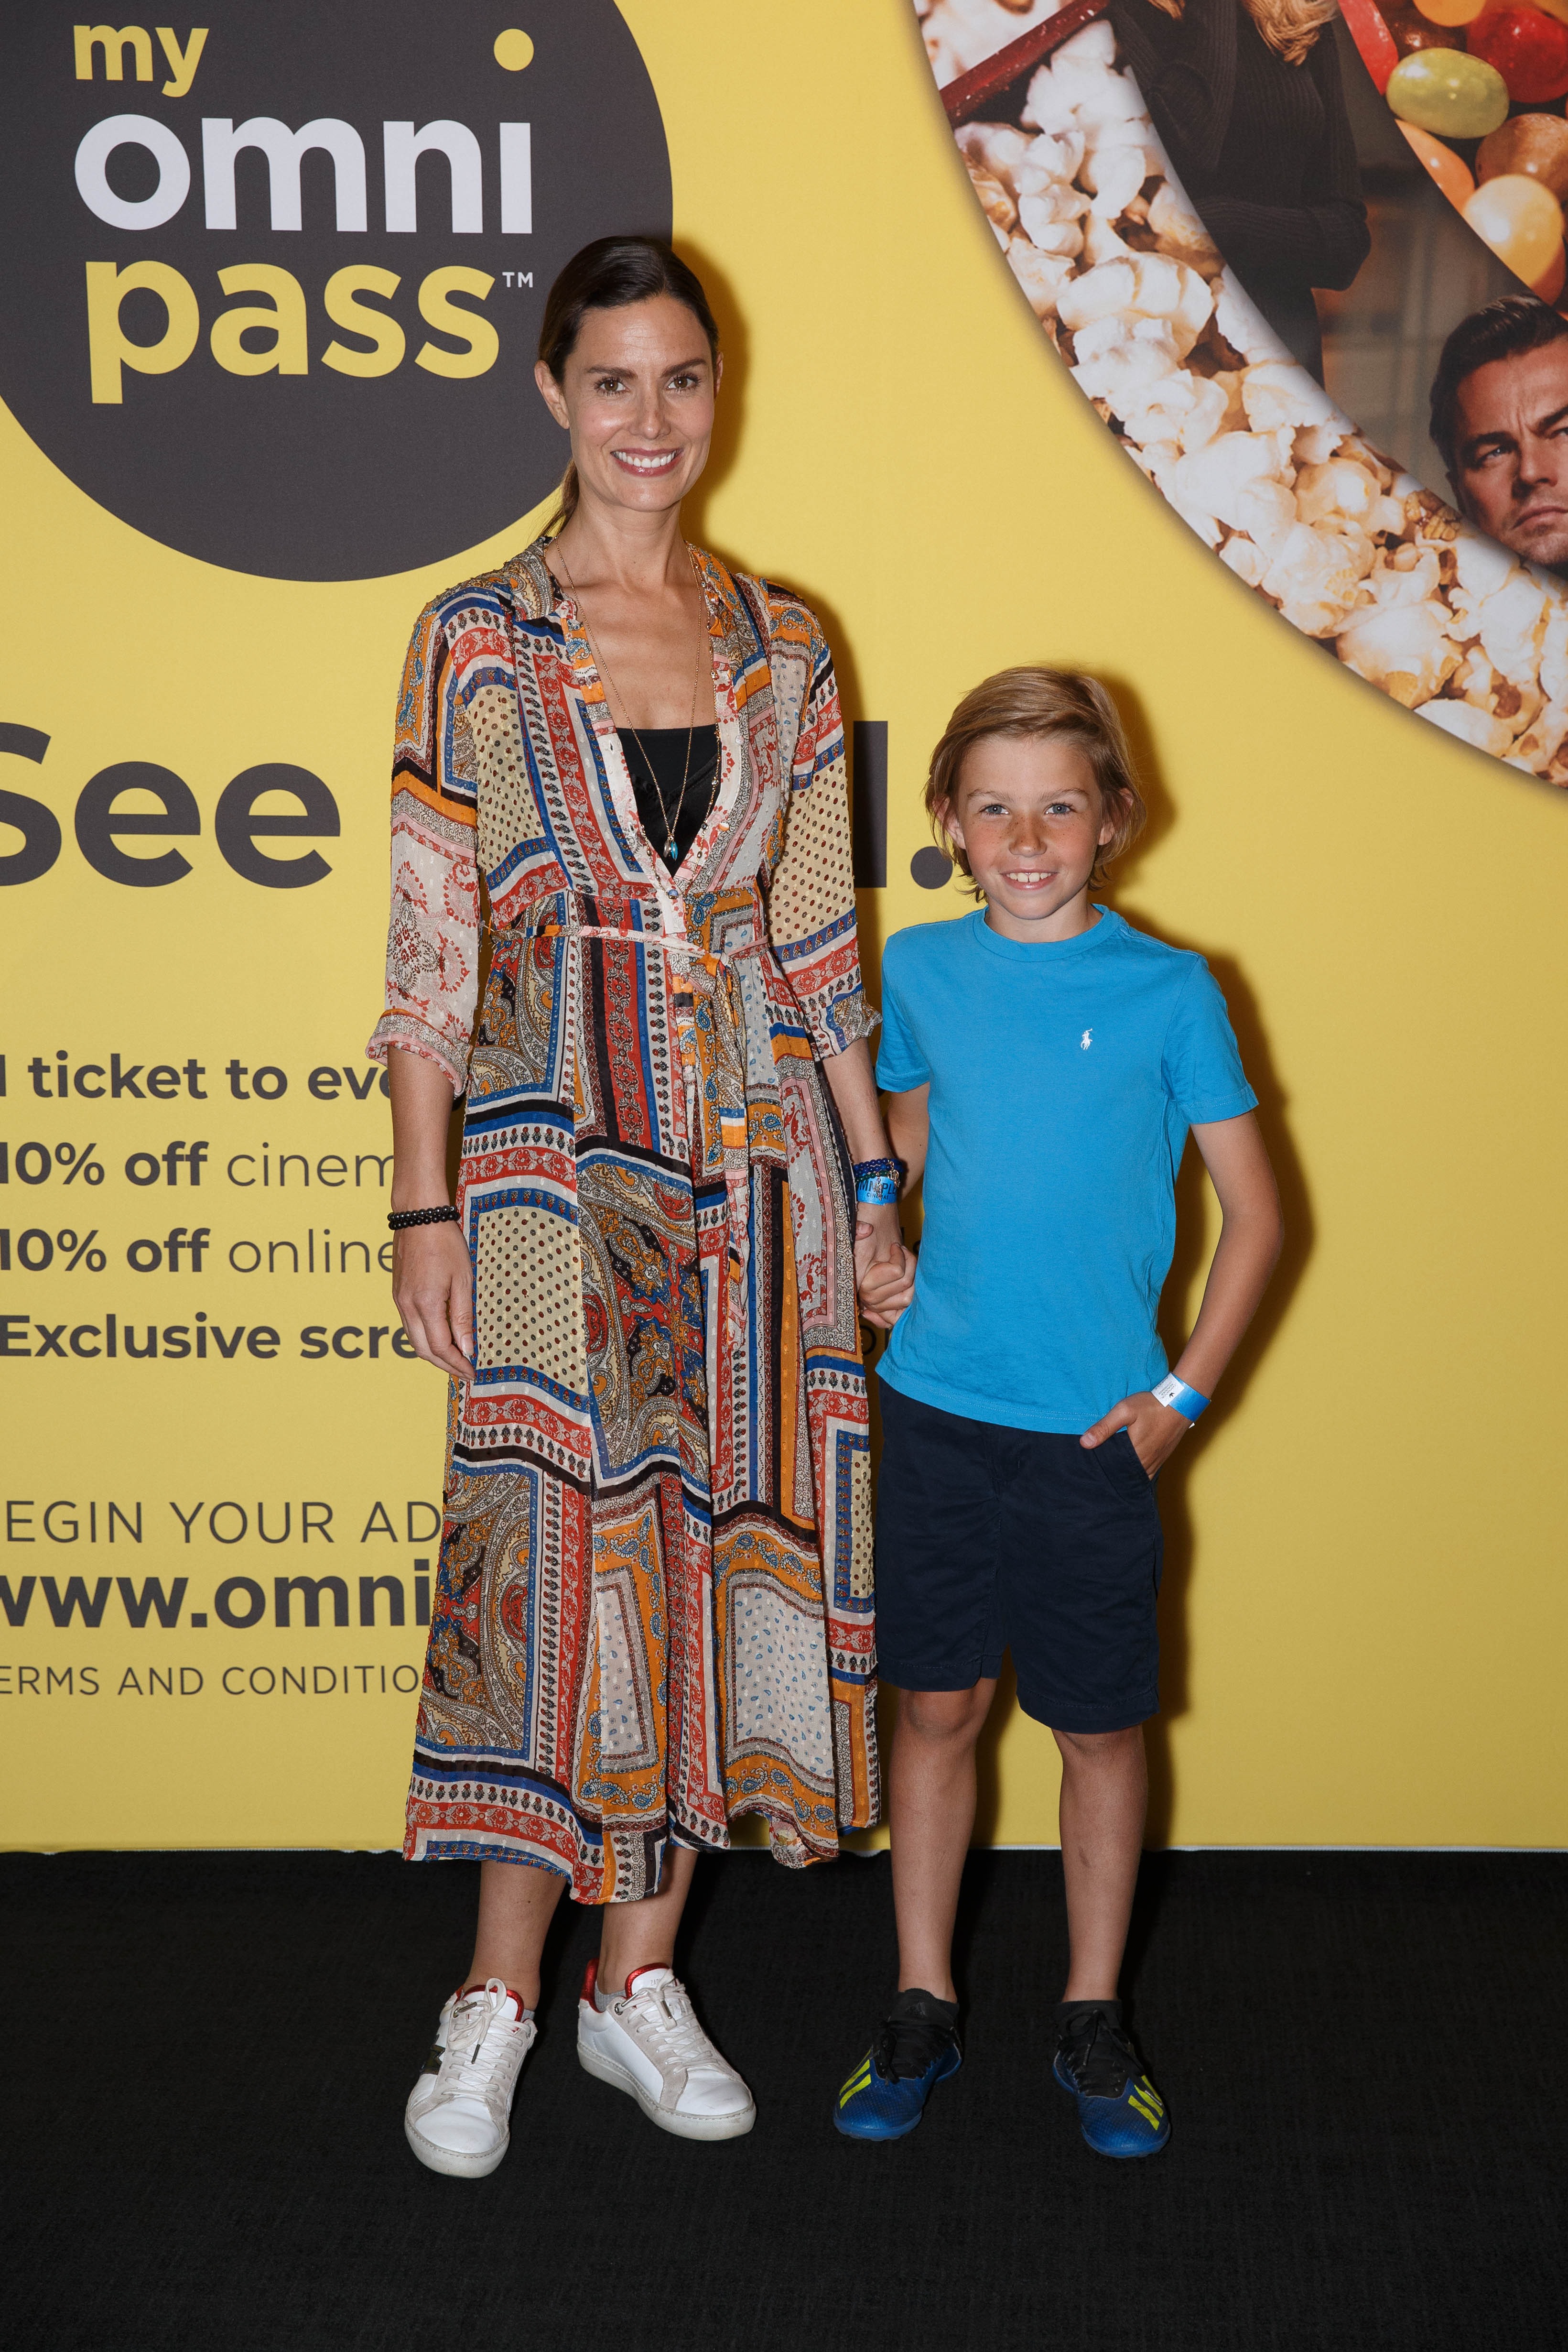 Alison Canavan and her son James (8) pictured at the MyOmniPass private screening at Omniplex Rathmines, Tuesday 2nd July Photograph Fran Veale